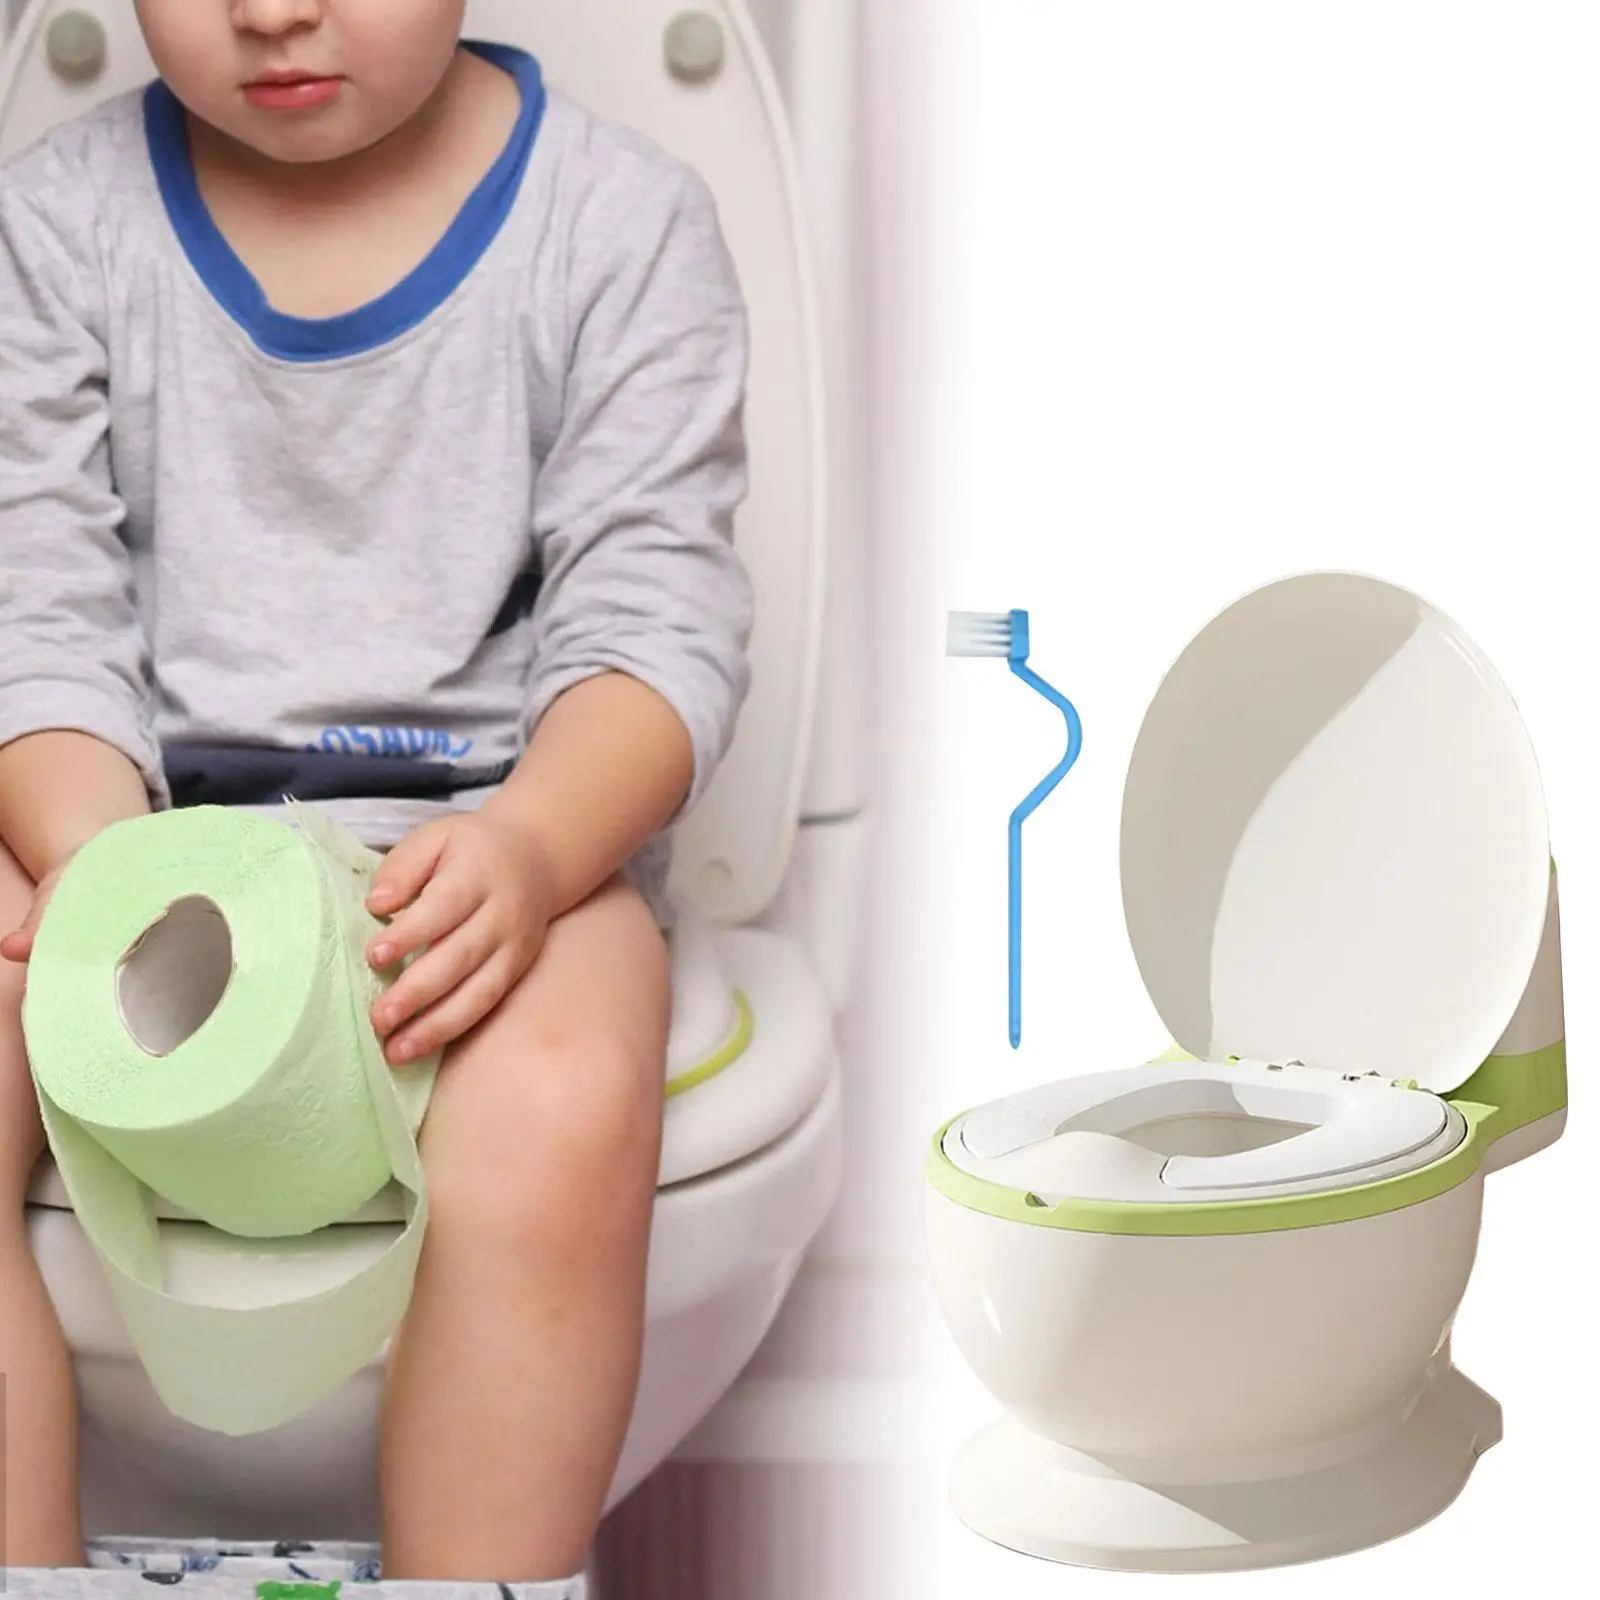 Baby Potty Toilet (Brush Included) Easy to Clean Compact Size Training Transition Potty Seat for Bedroom Kids Girls Boys Babies